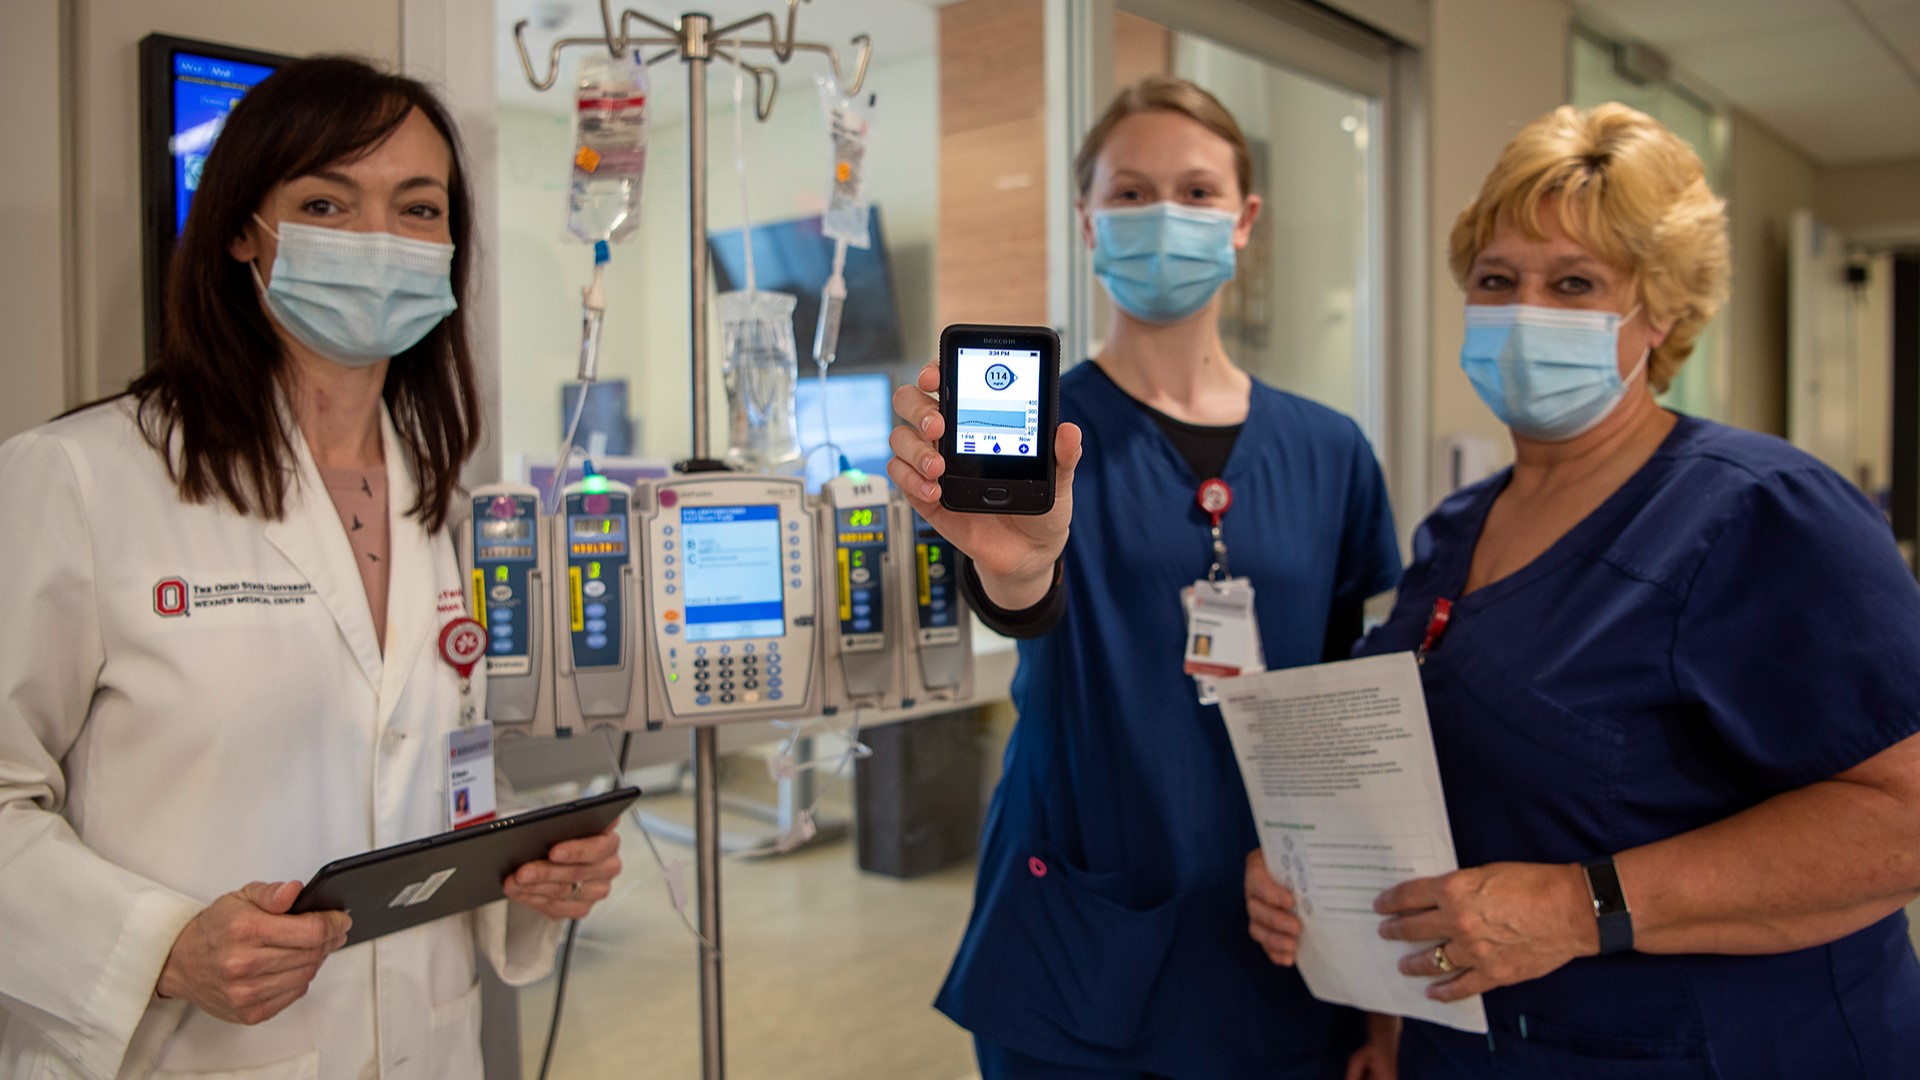 The nurses came up with the idea to use continuous glucose monitoring devices for critically ill COVID-19 patients.